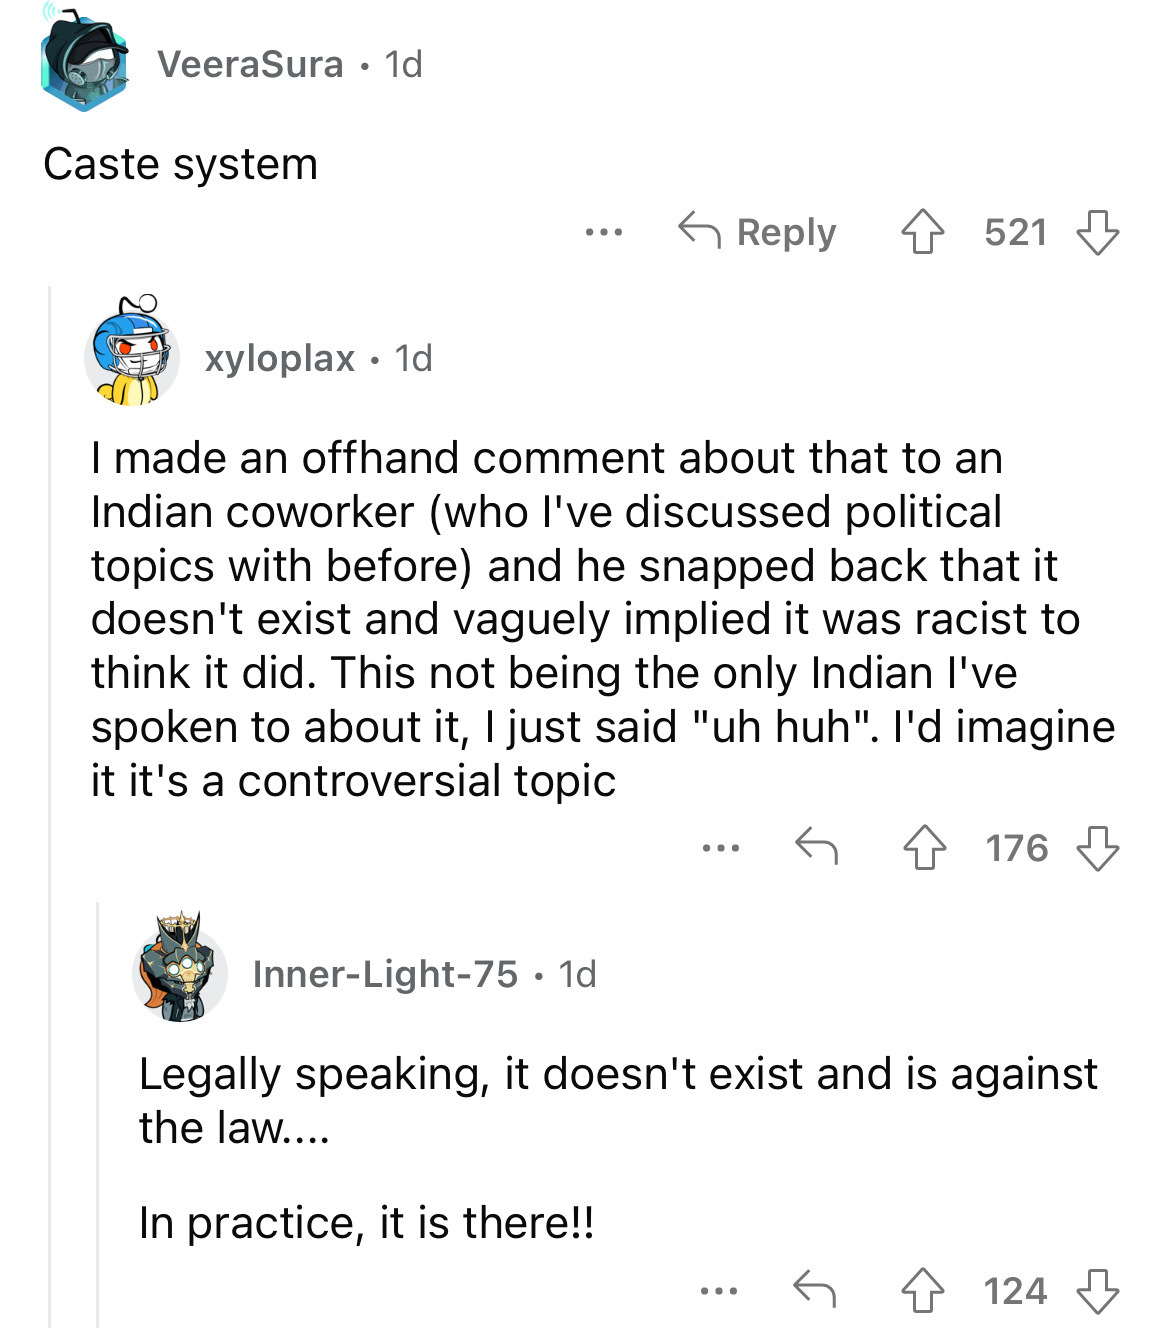 document - VeeraSura 1d Caste system xyloplax. 1d ... 4521 I made an offhand comment about that to an Indian coworker who I've discussed political topics with before and he snapped back that it doesn't exist and vaguely implied it was racist to think it d